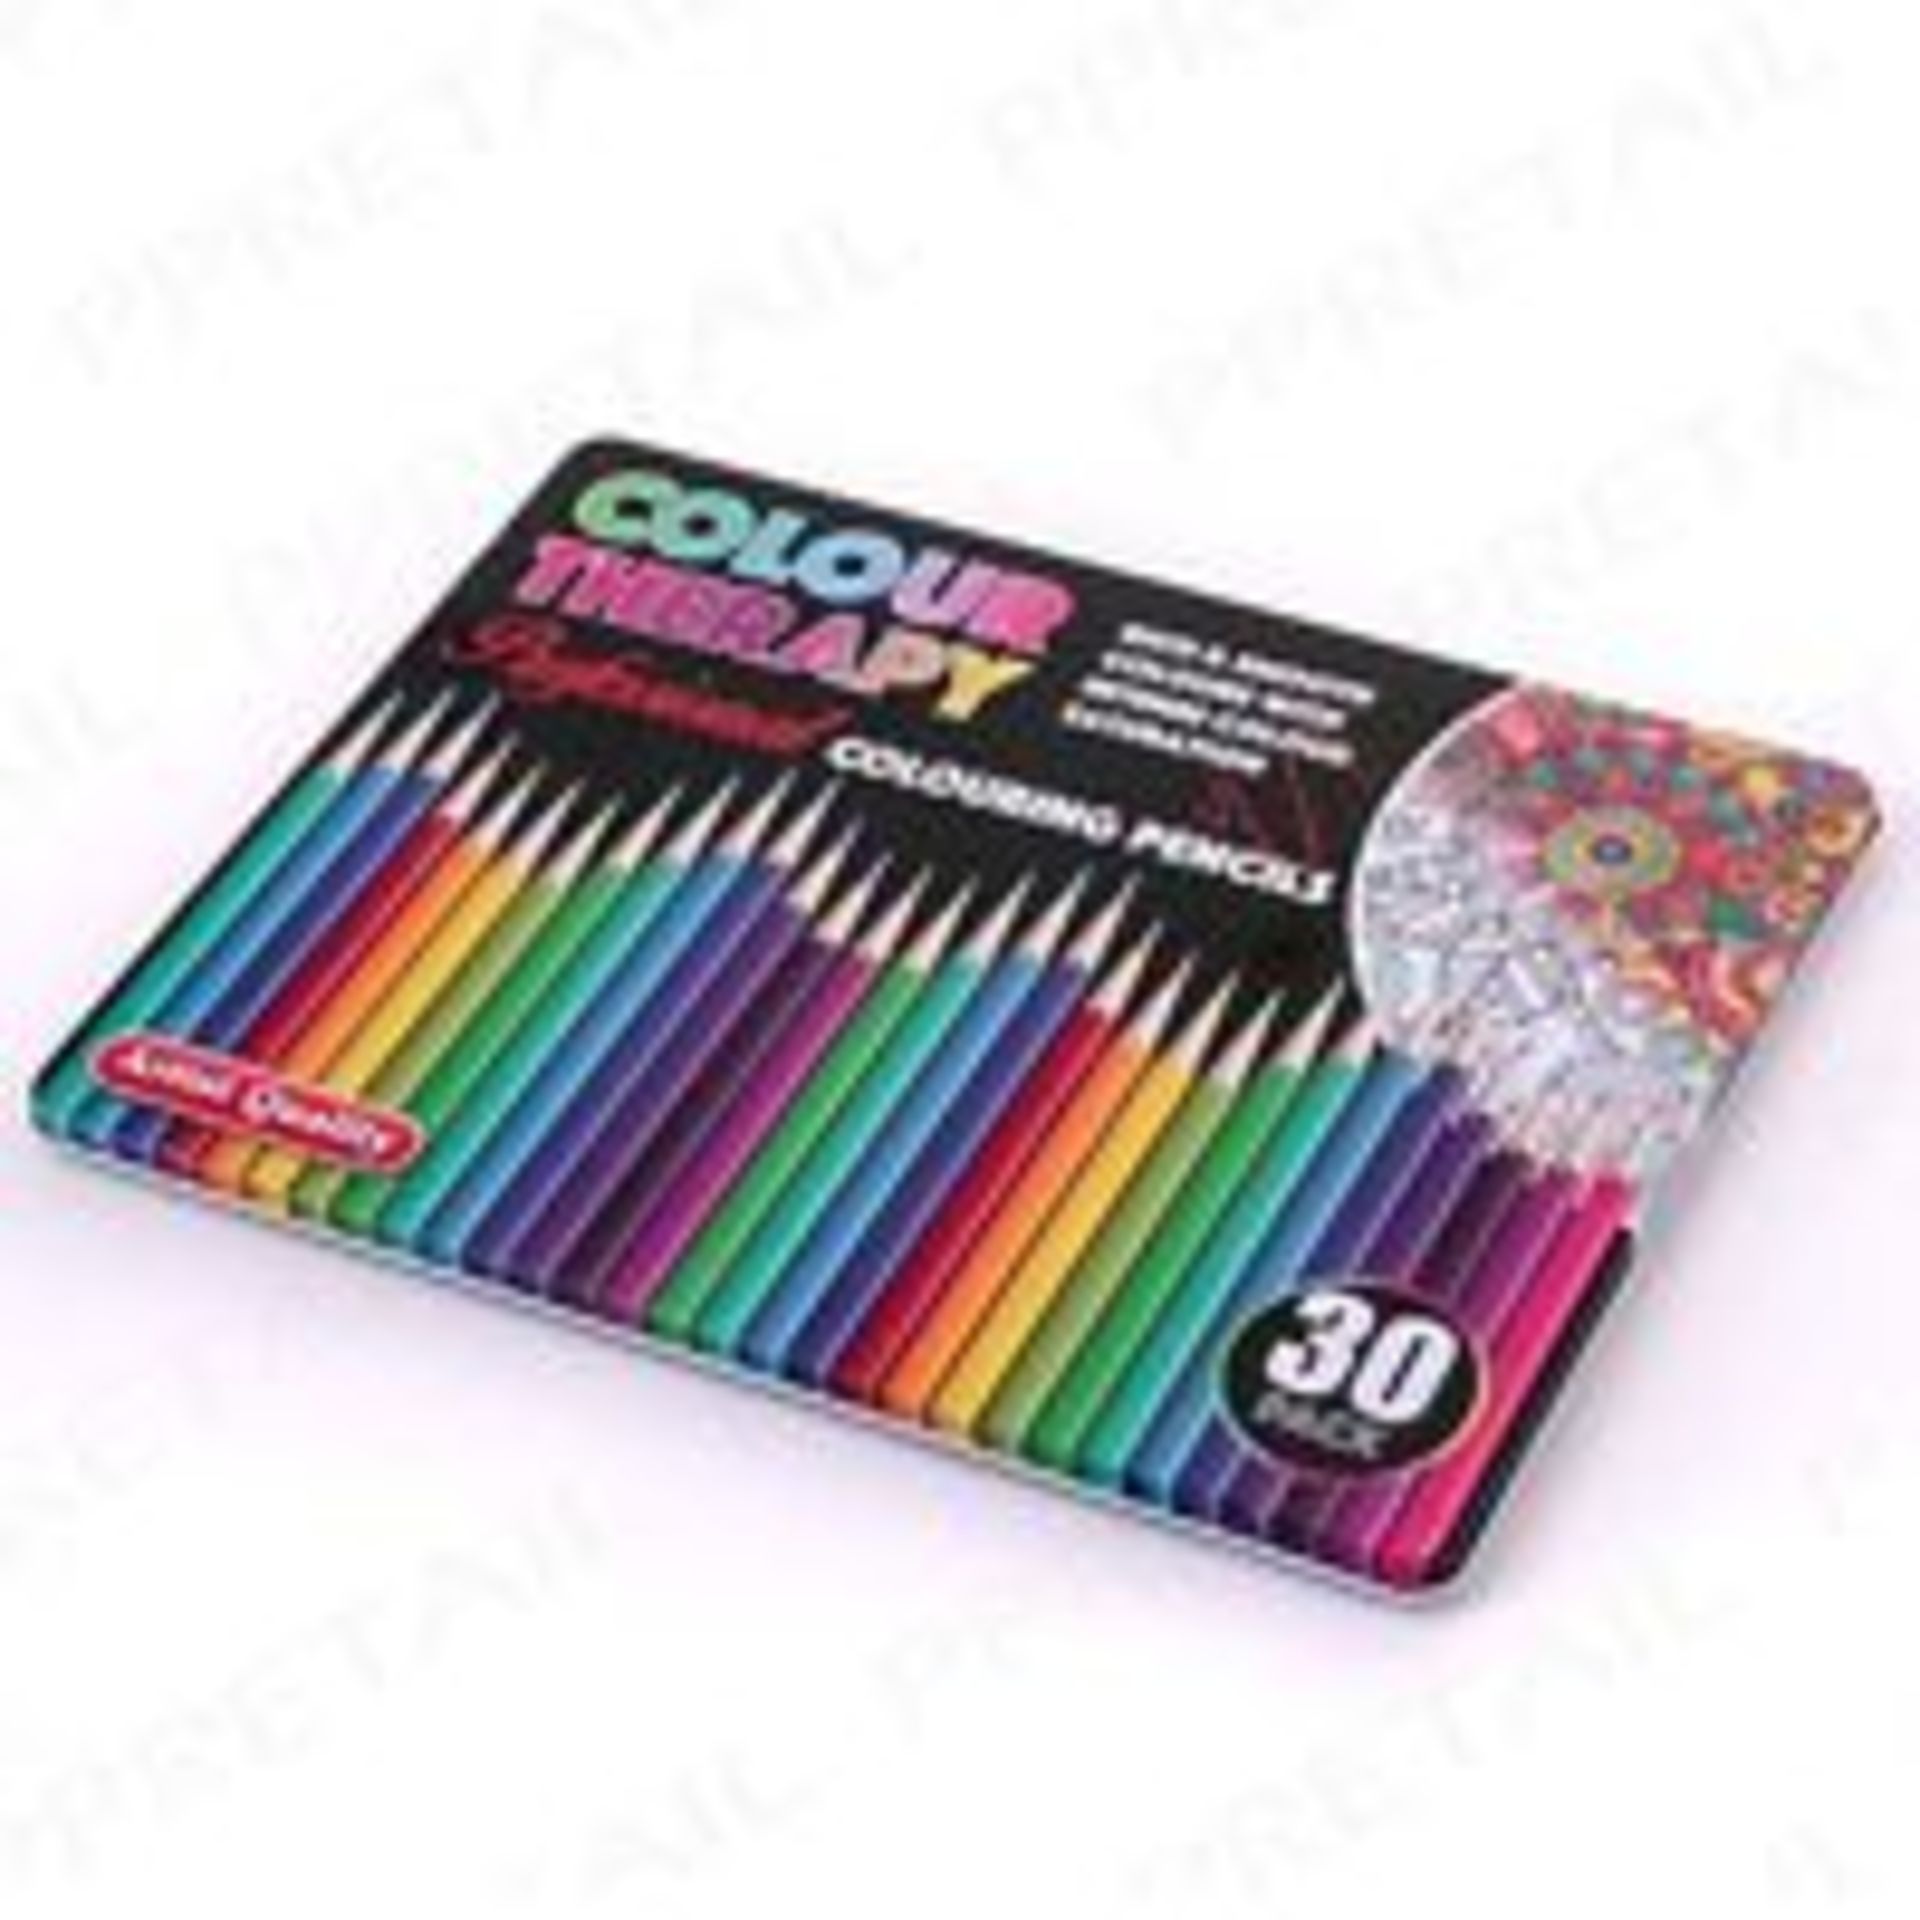 V *TRADE QTY* Brand New 30 Pack Professional Colouring Pencils - Artist Quality X 4 YOUR BID PRICE